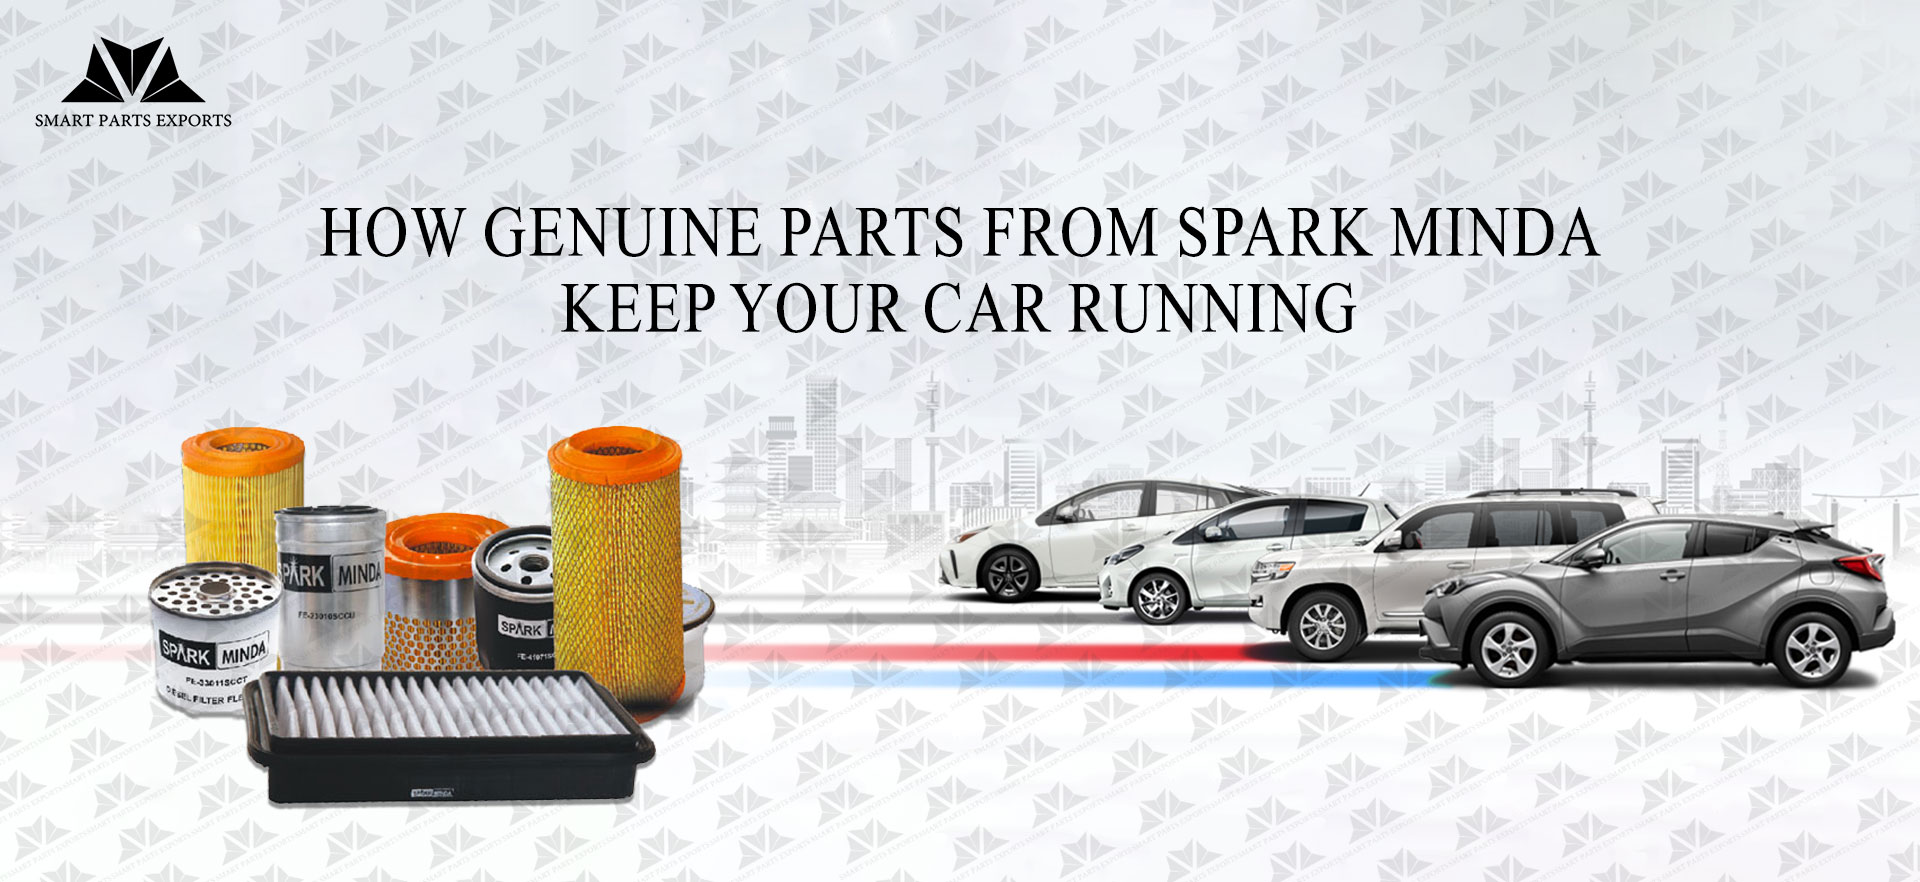 How Genuine Parts from Spark Minda Keep Your Car Running